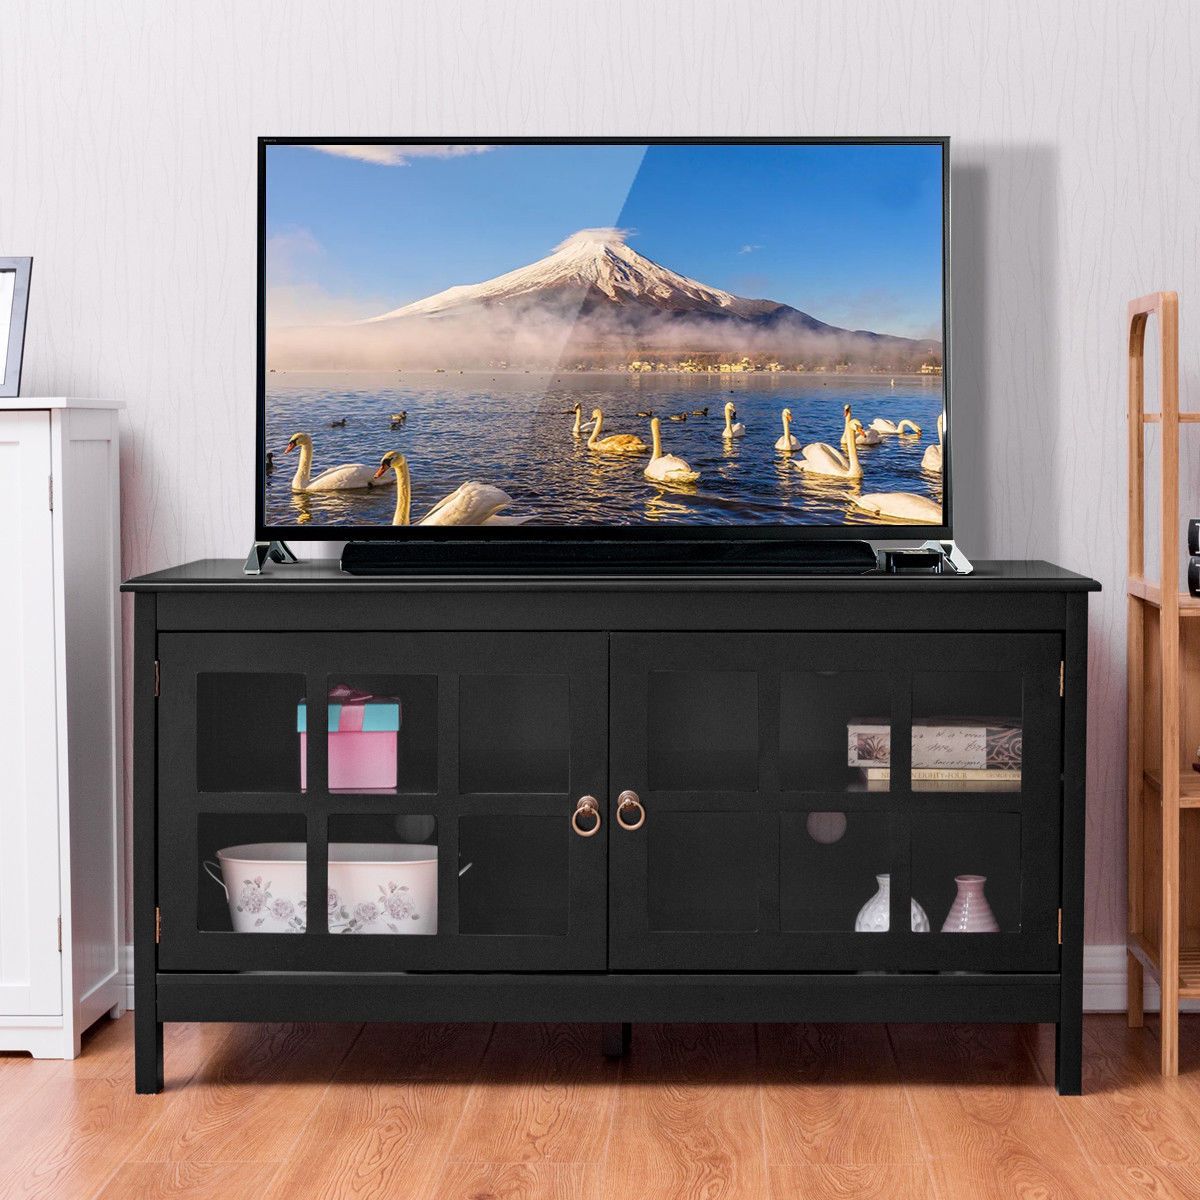 Gymax 50'' Tv Stand Modern Wood Storage Console Inside Modern Wooden Tv Stands (View 3 of 15)